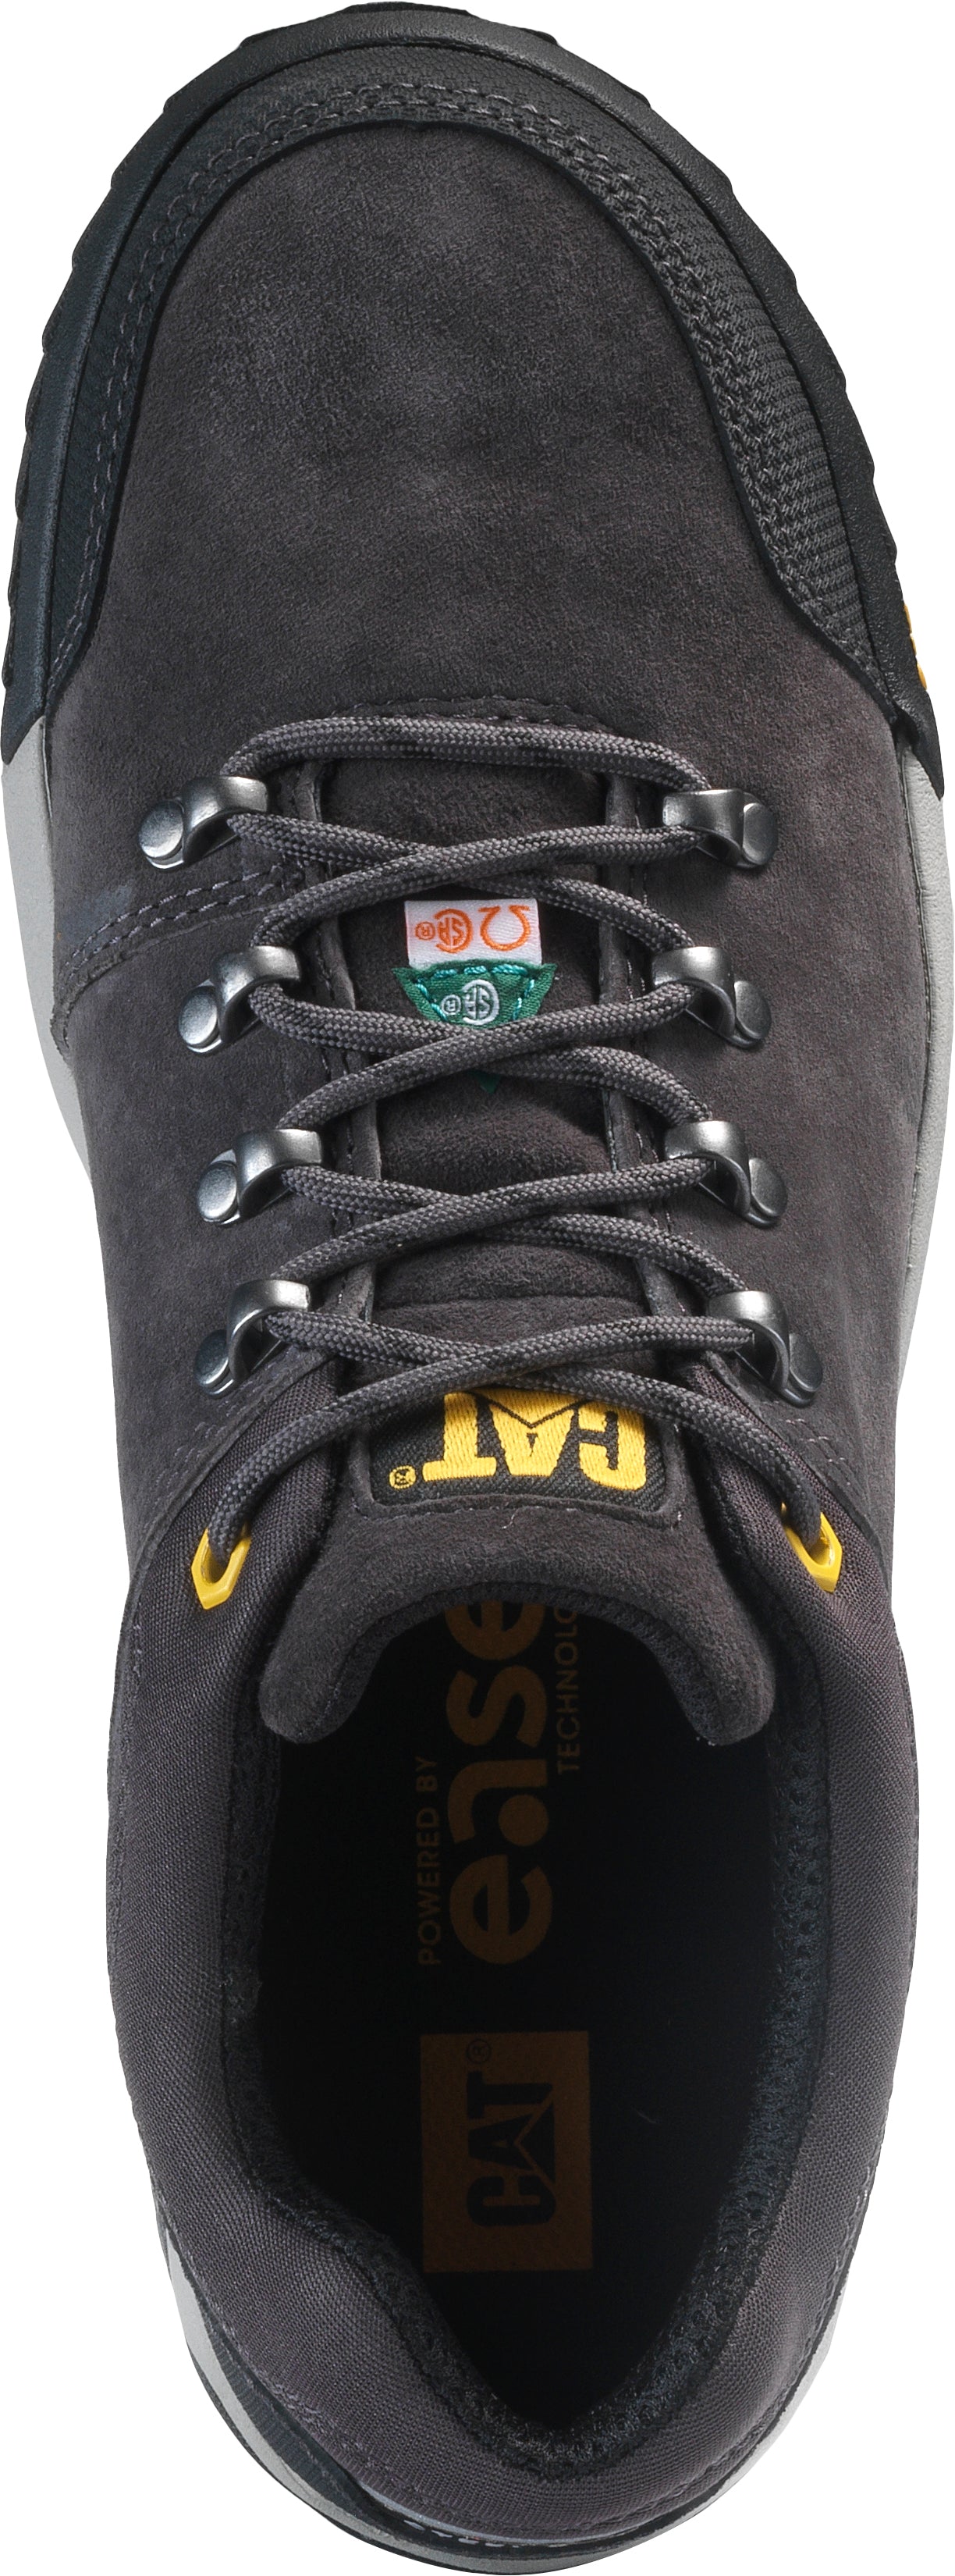 CONVERGE, Safety shoes for men